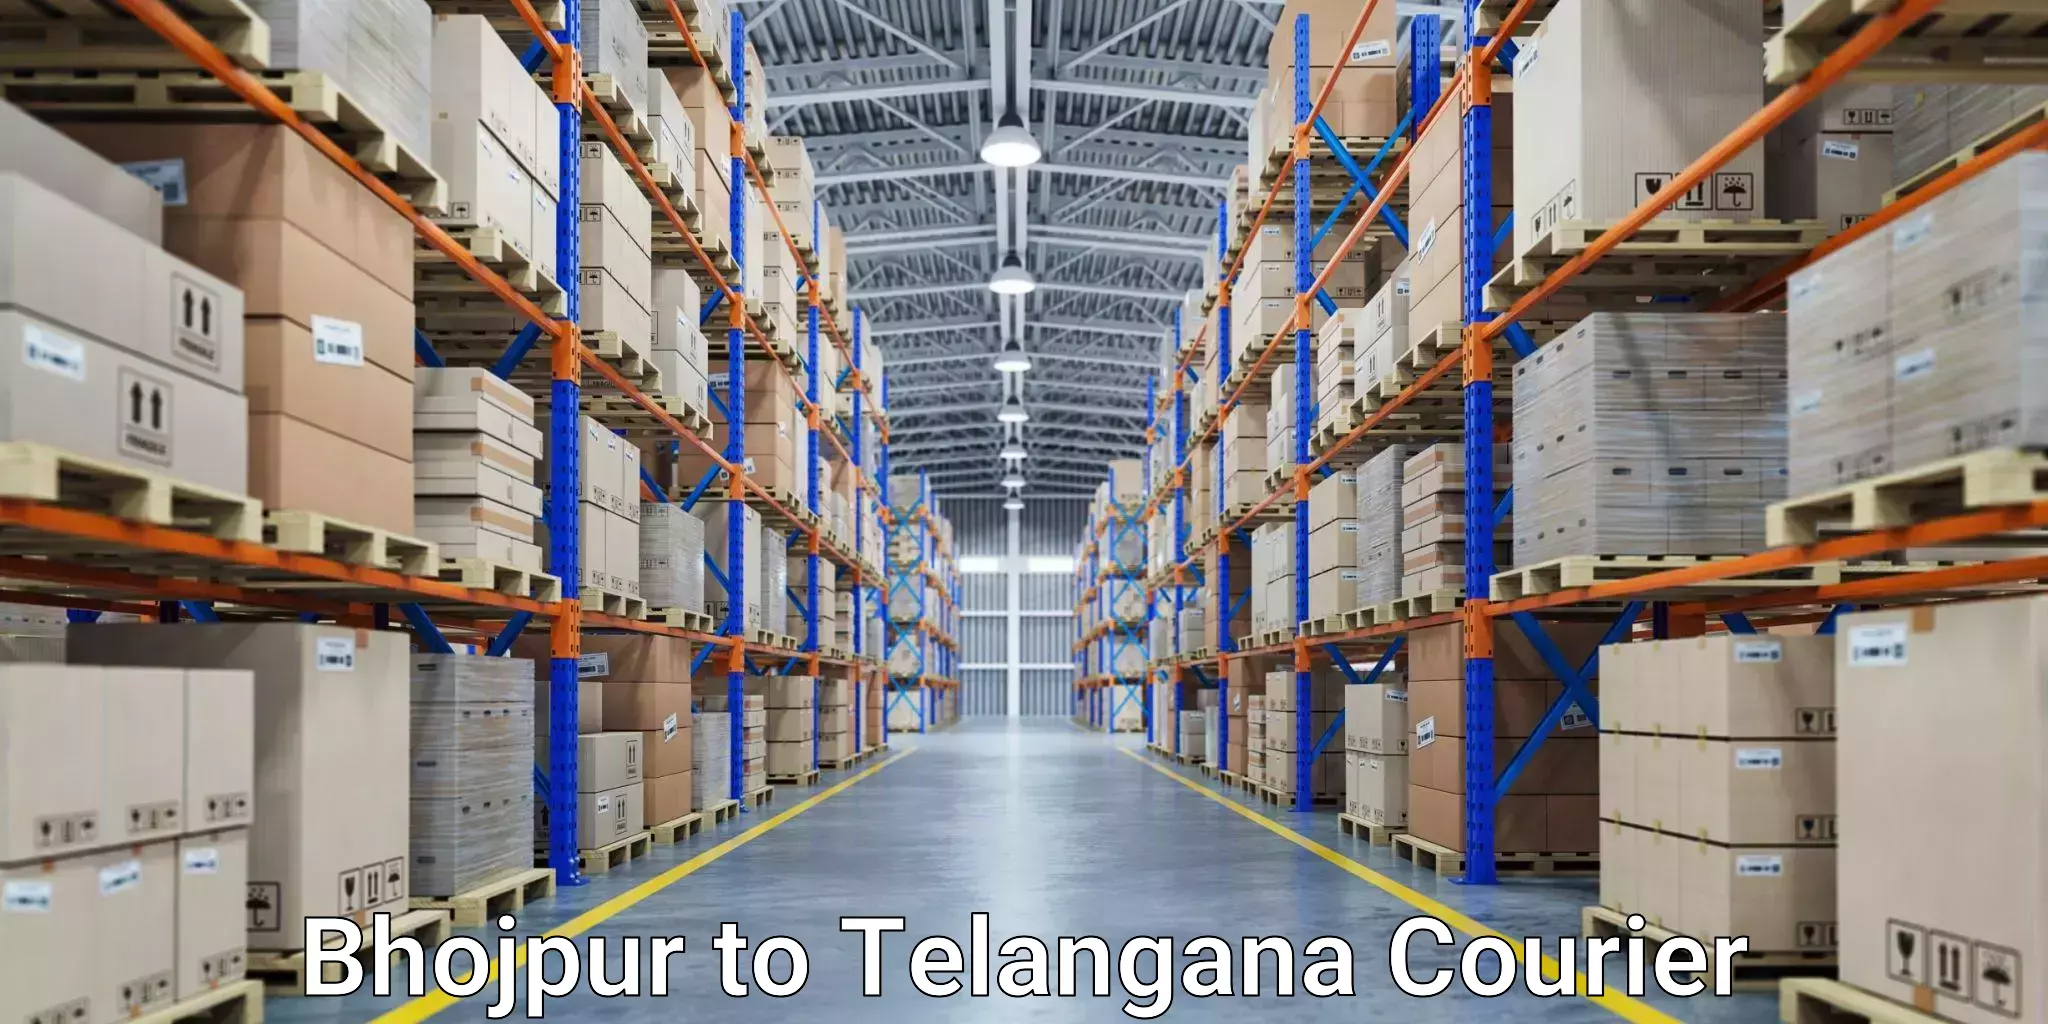 Seamless shipping service Bhojpur to Khairatabad